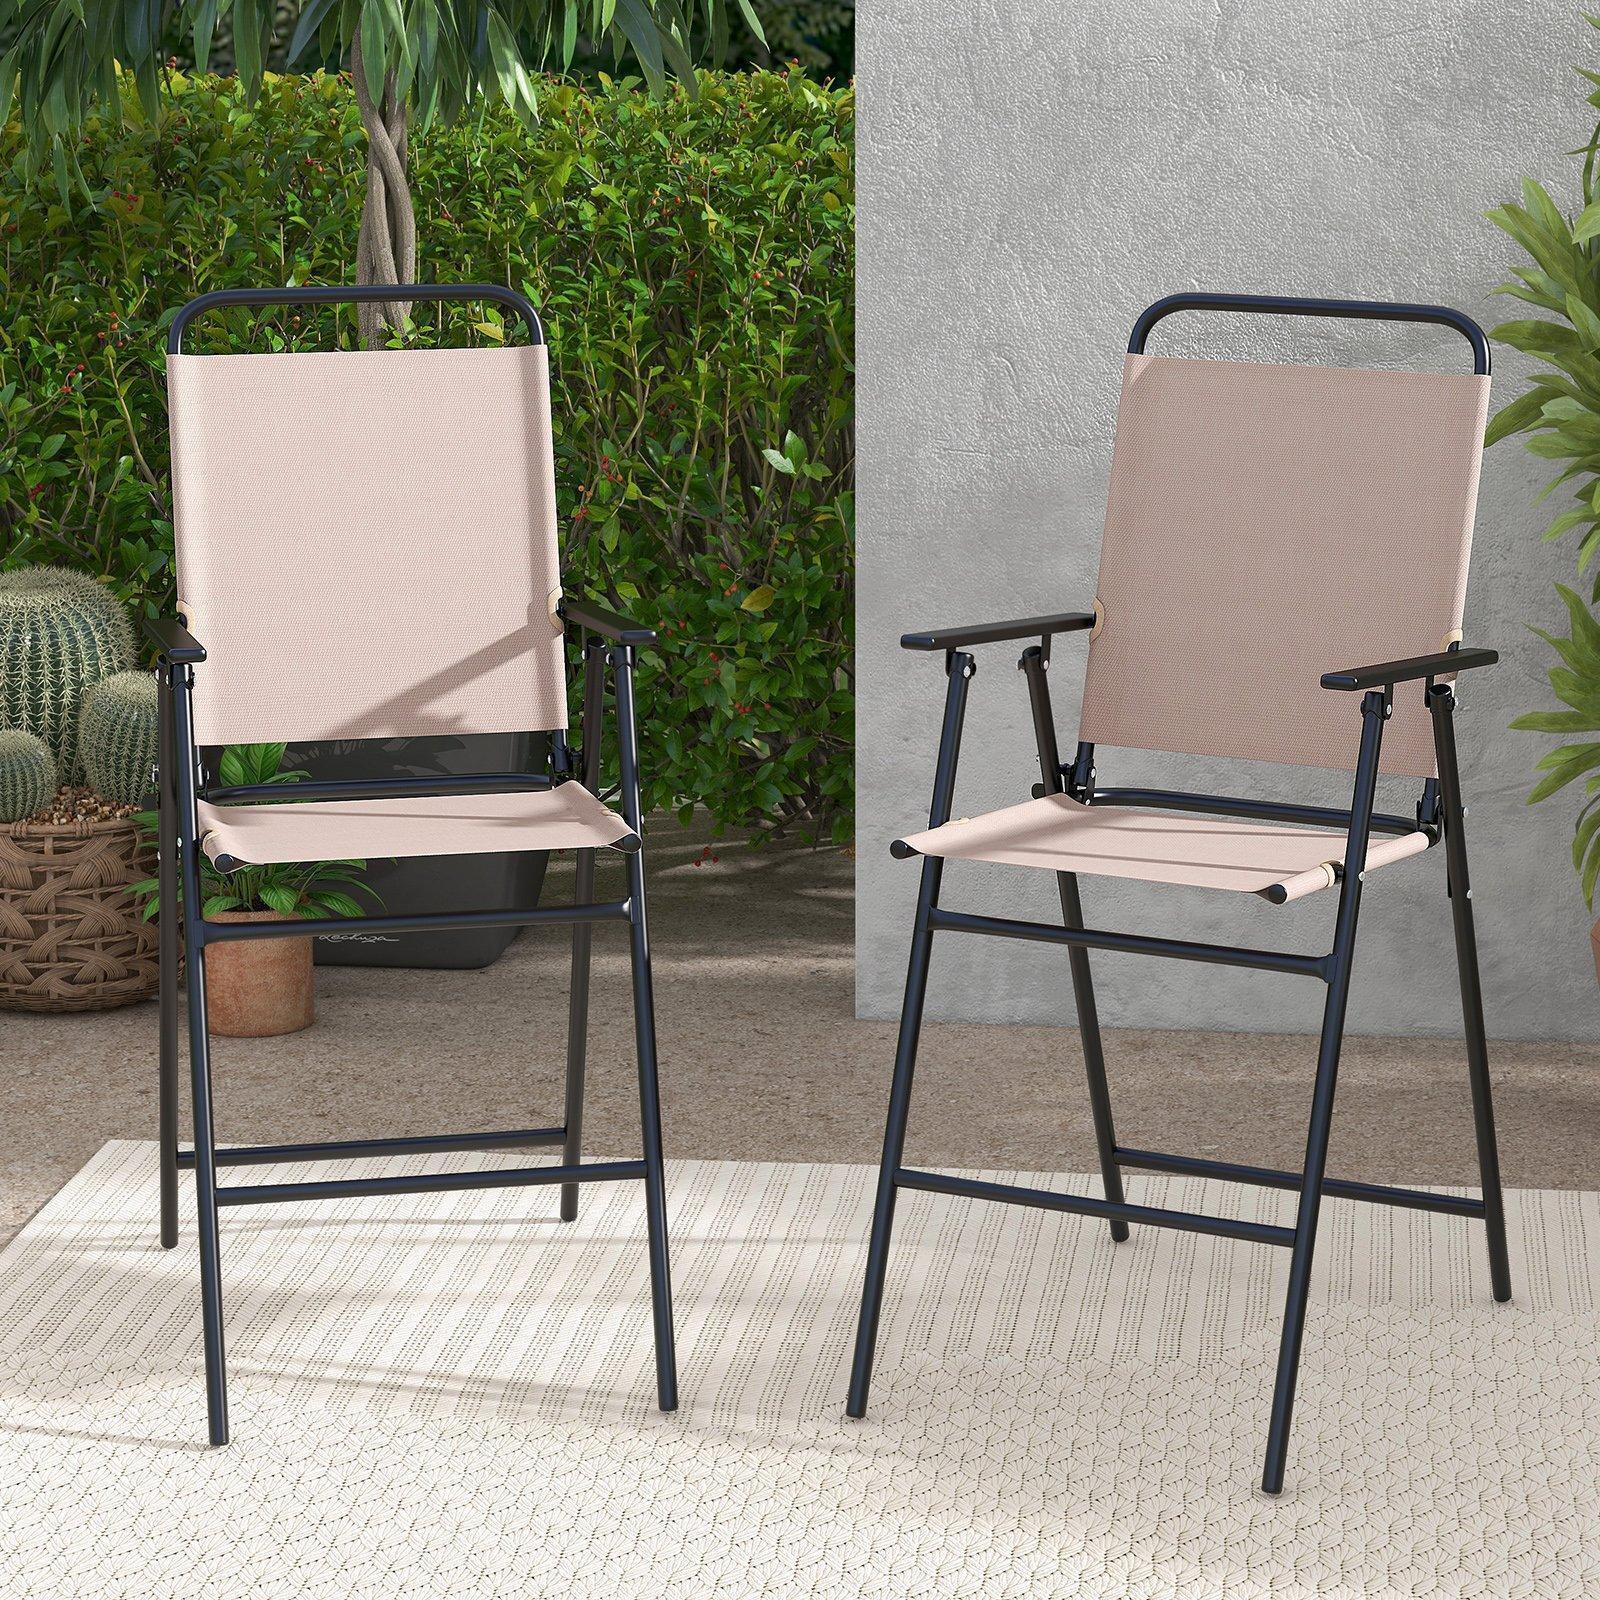 Set of 2 Outdoor Folding Bar Chair Patio Furniture Chair Set W/ Fabric Backrest - image 1